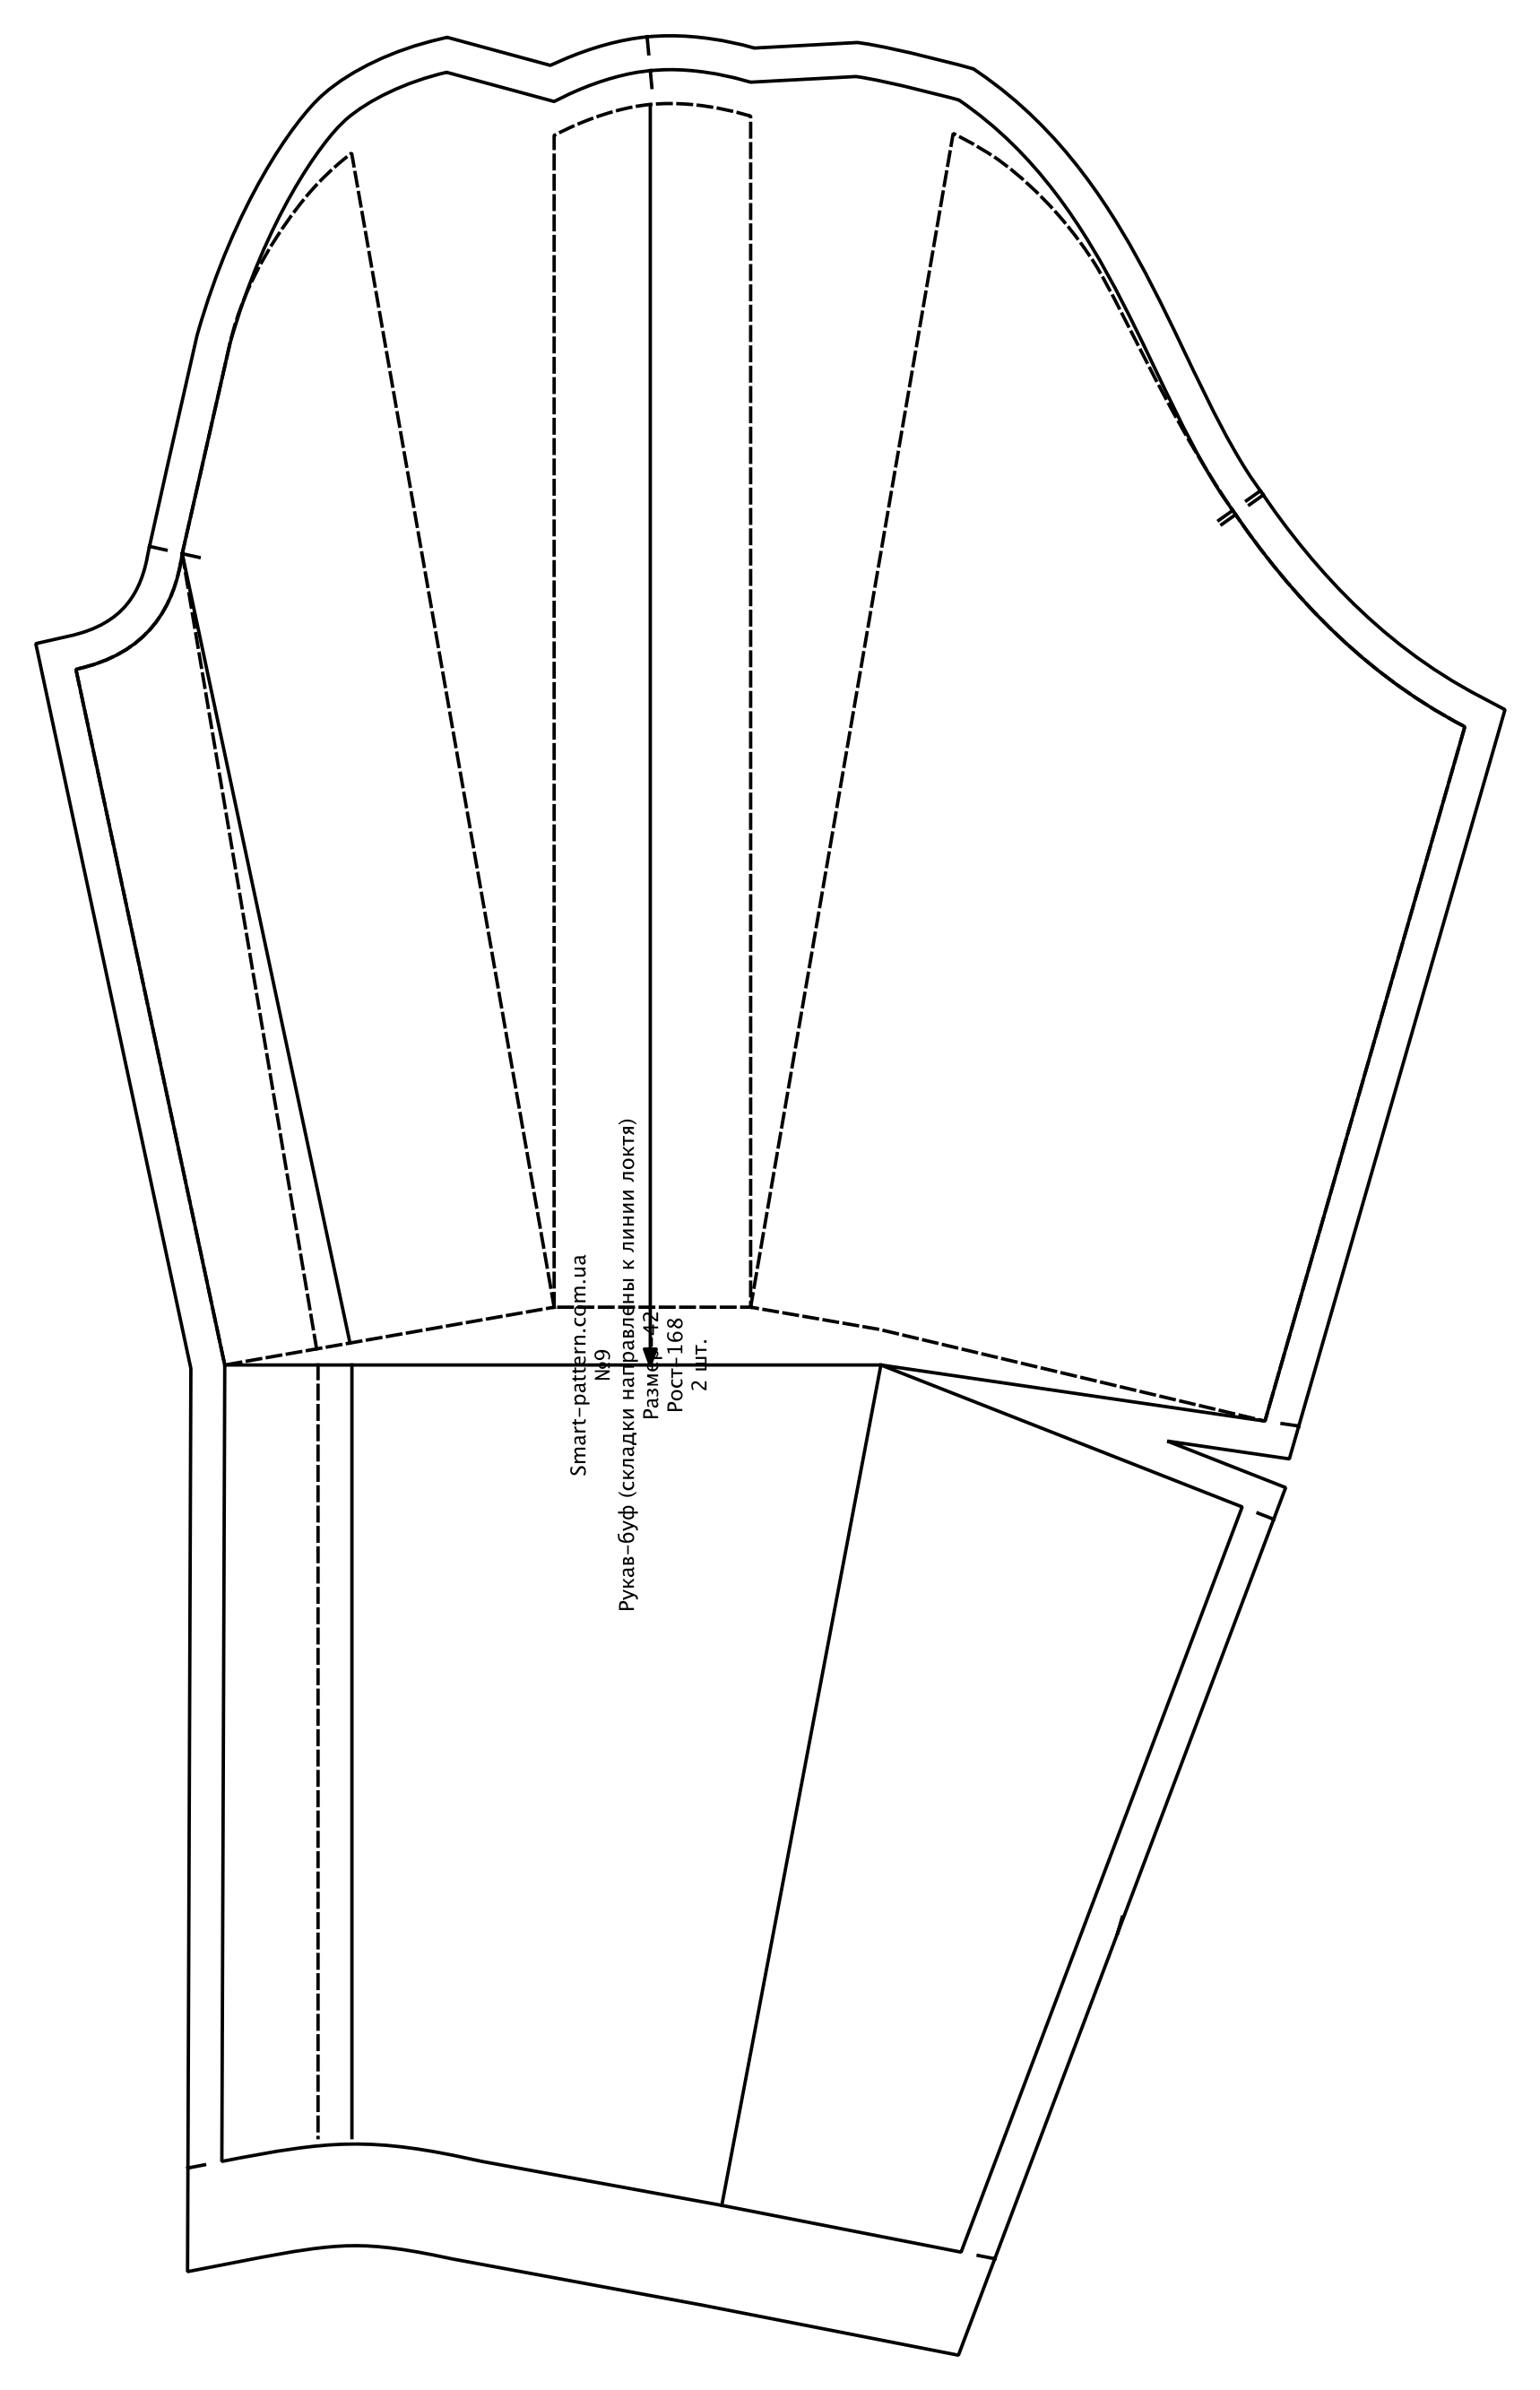 Set of sleeves to the base of a dress of a semi-fitted silhouette according to the method of M. Muller and Son (russian language)